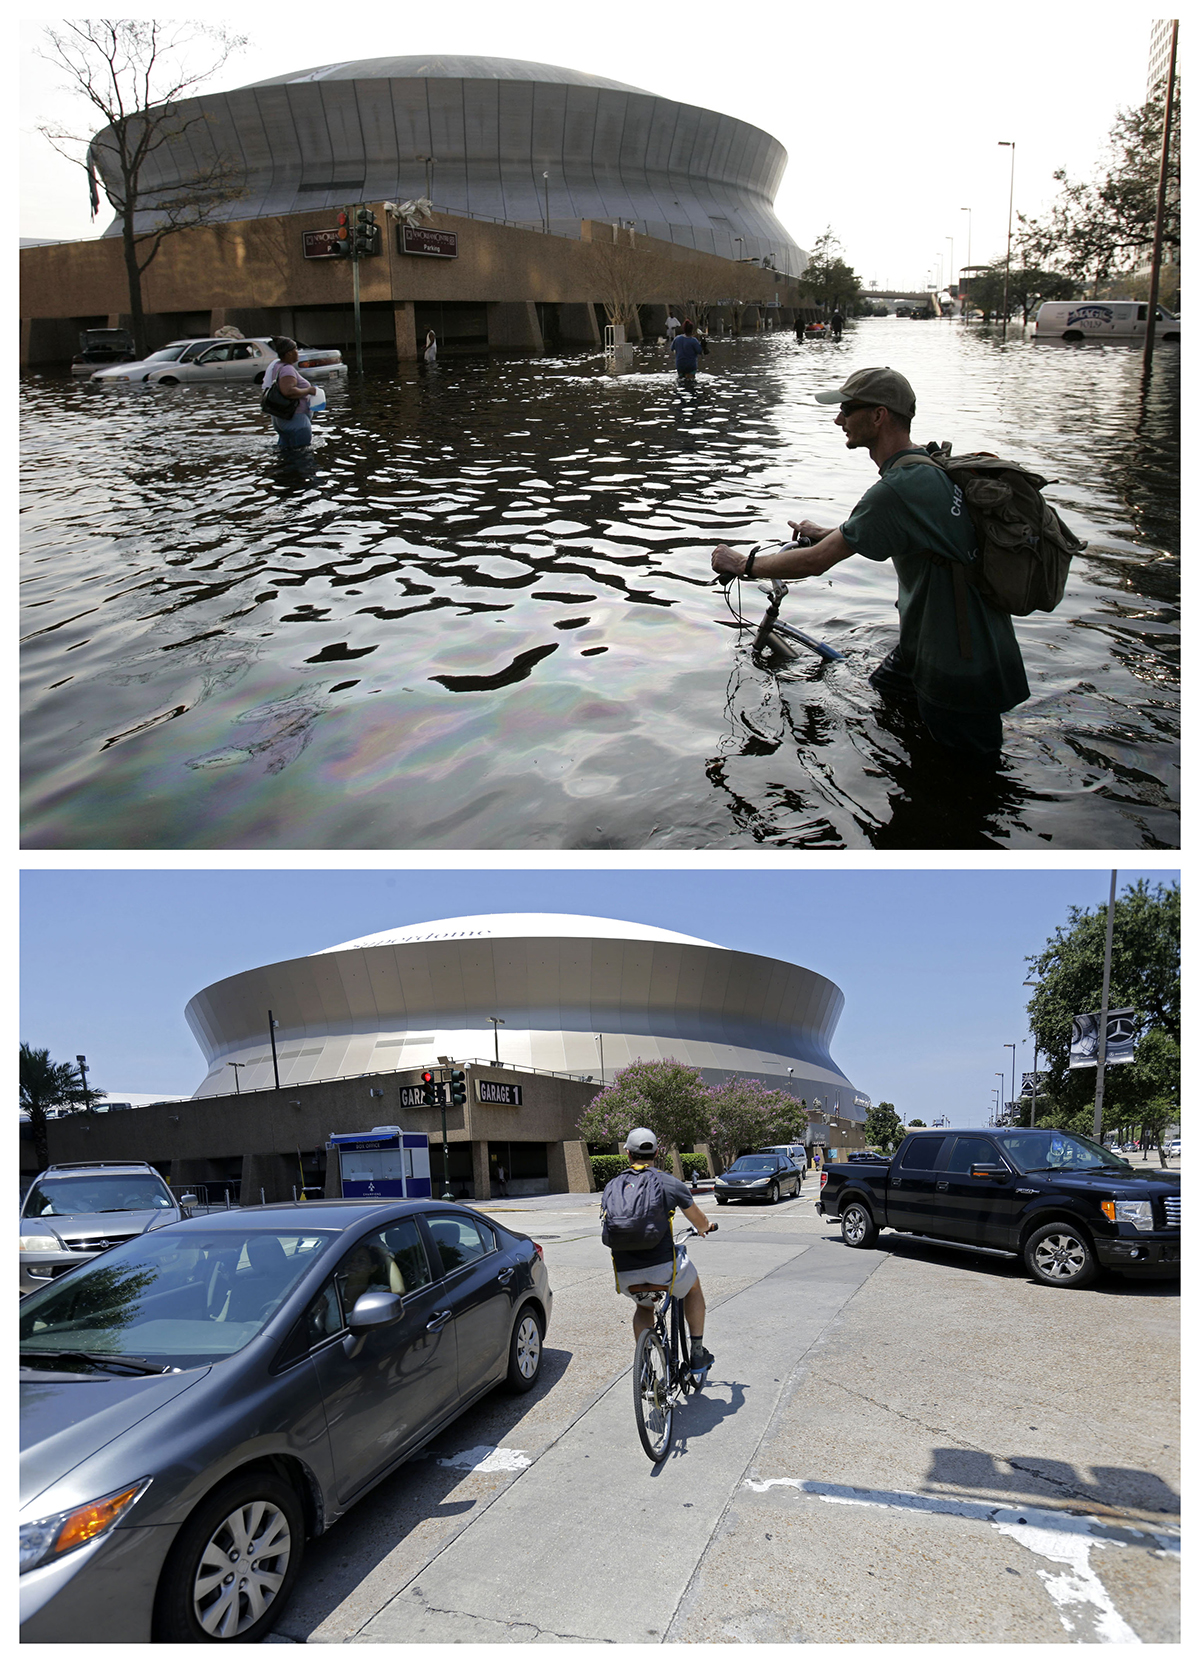 This combination of Aug, 31, 2005, and July 31, 2015, photos shows a man pushing his bicycle through flood waters near the Superdome in New Orleans after Hurricane Katrina left much of the city under water, and a cyclist outside the renamed Mercedes-Benz Superdome a decade later. (Eric Gay, Gerald Herbert / Associated Press)